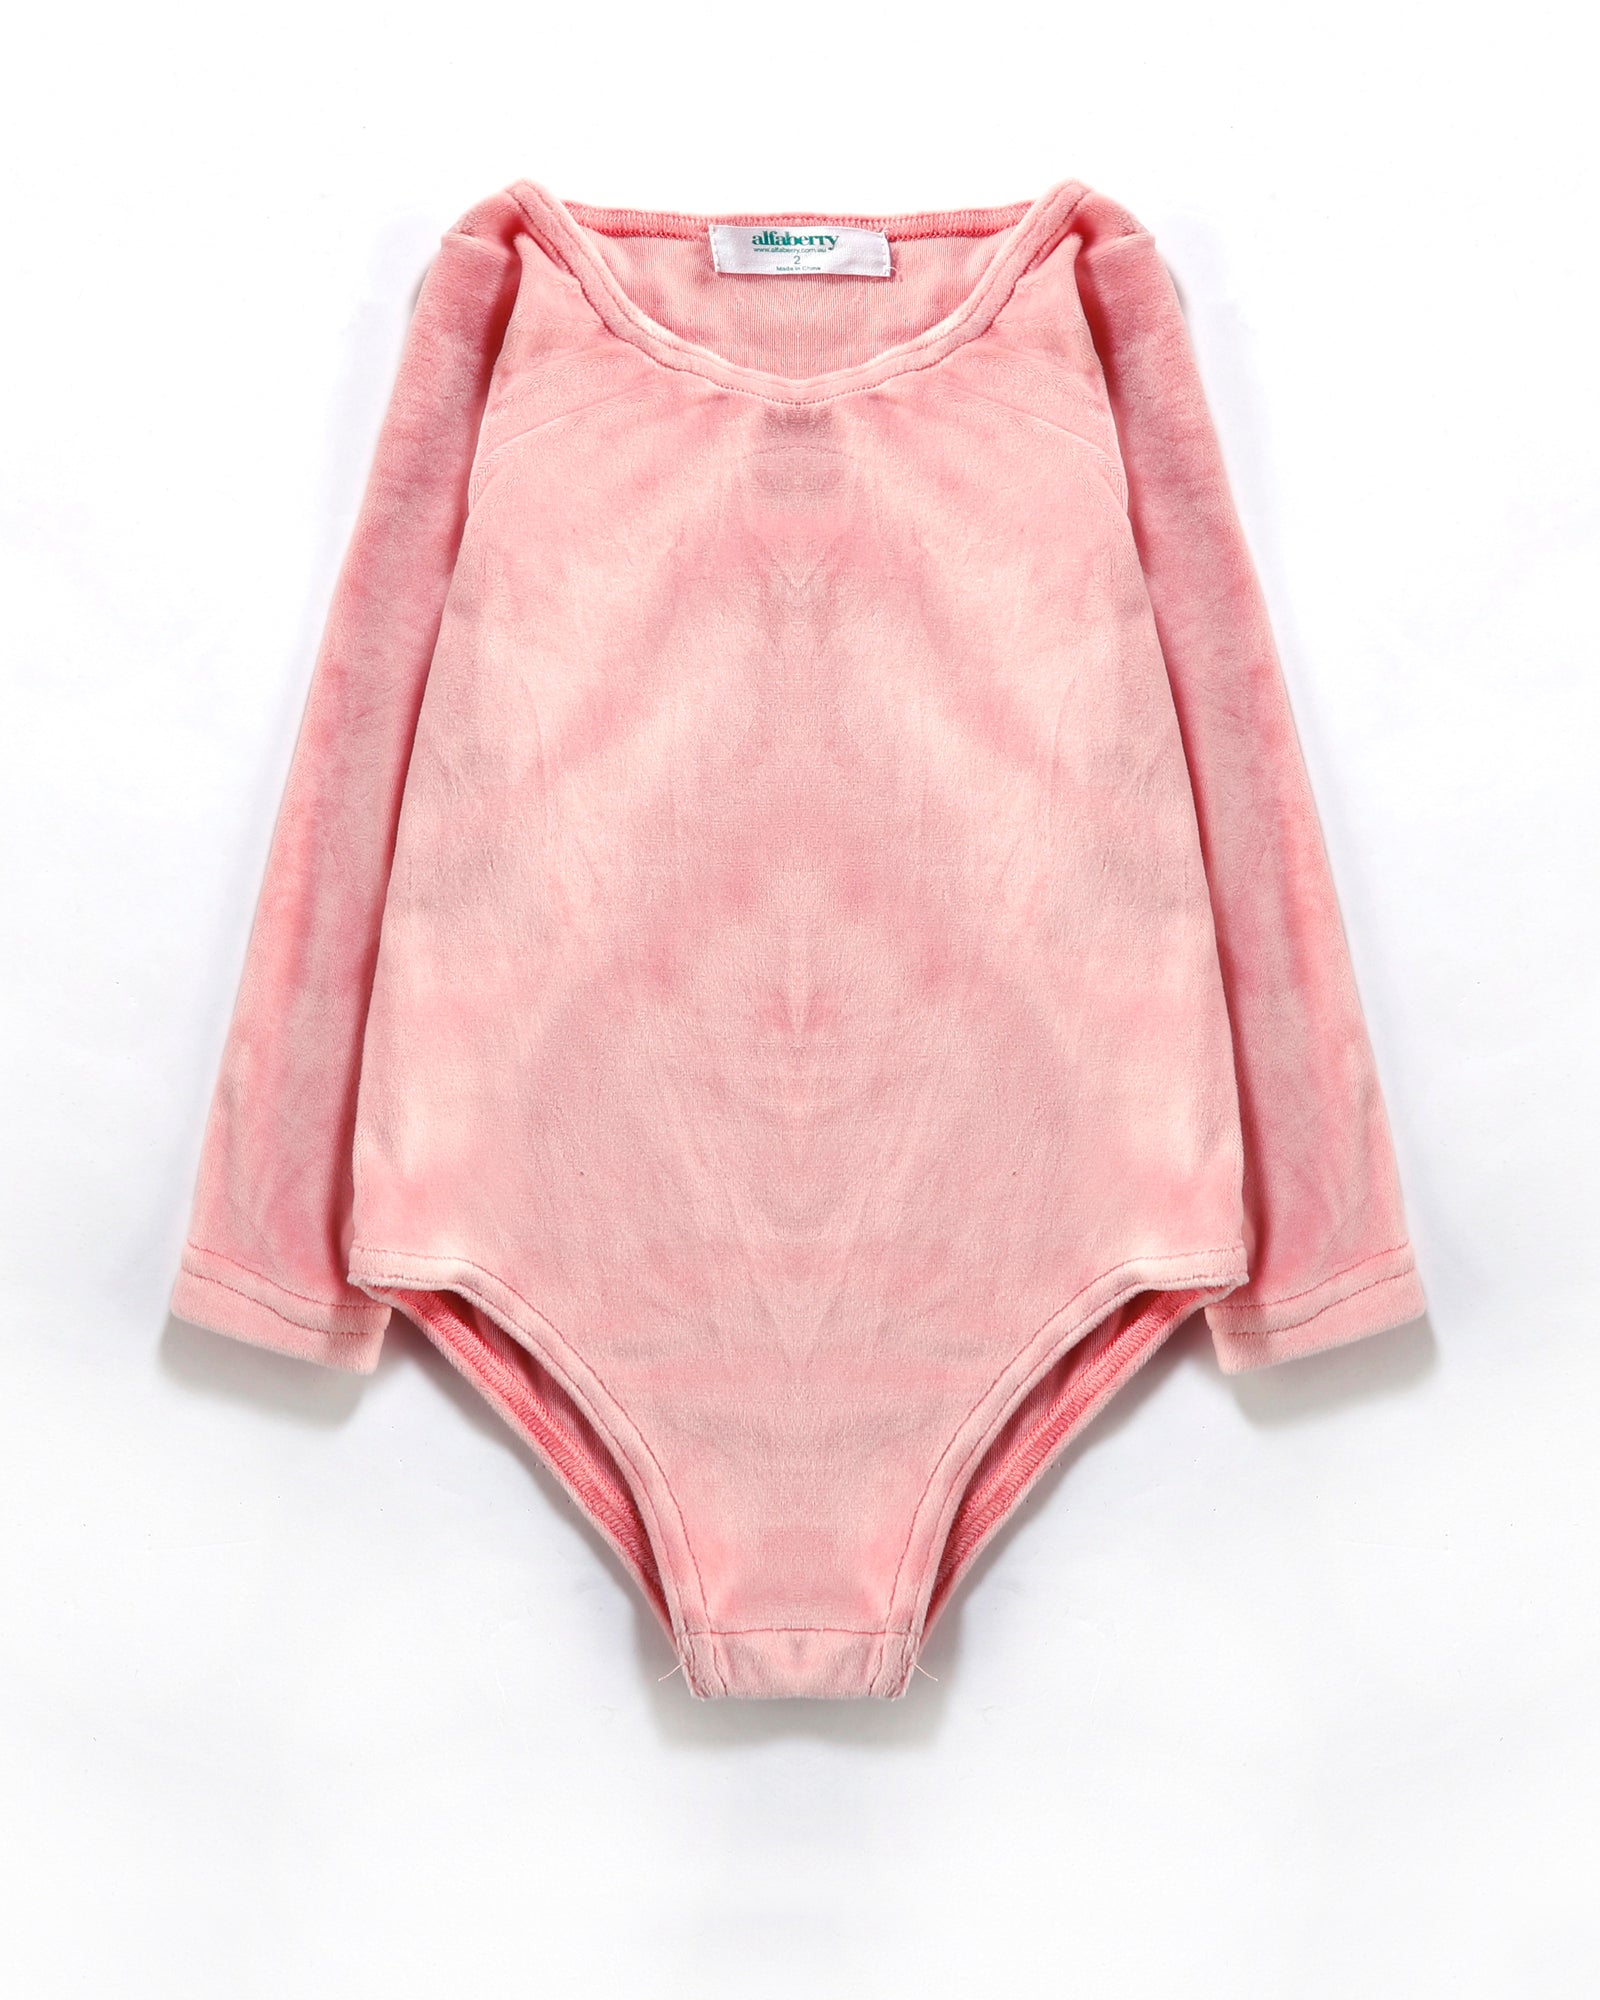 Cosy Bodysuit in Pink Front